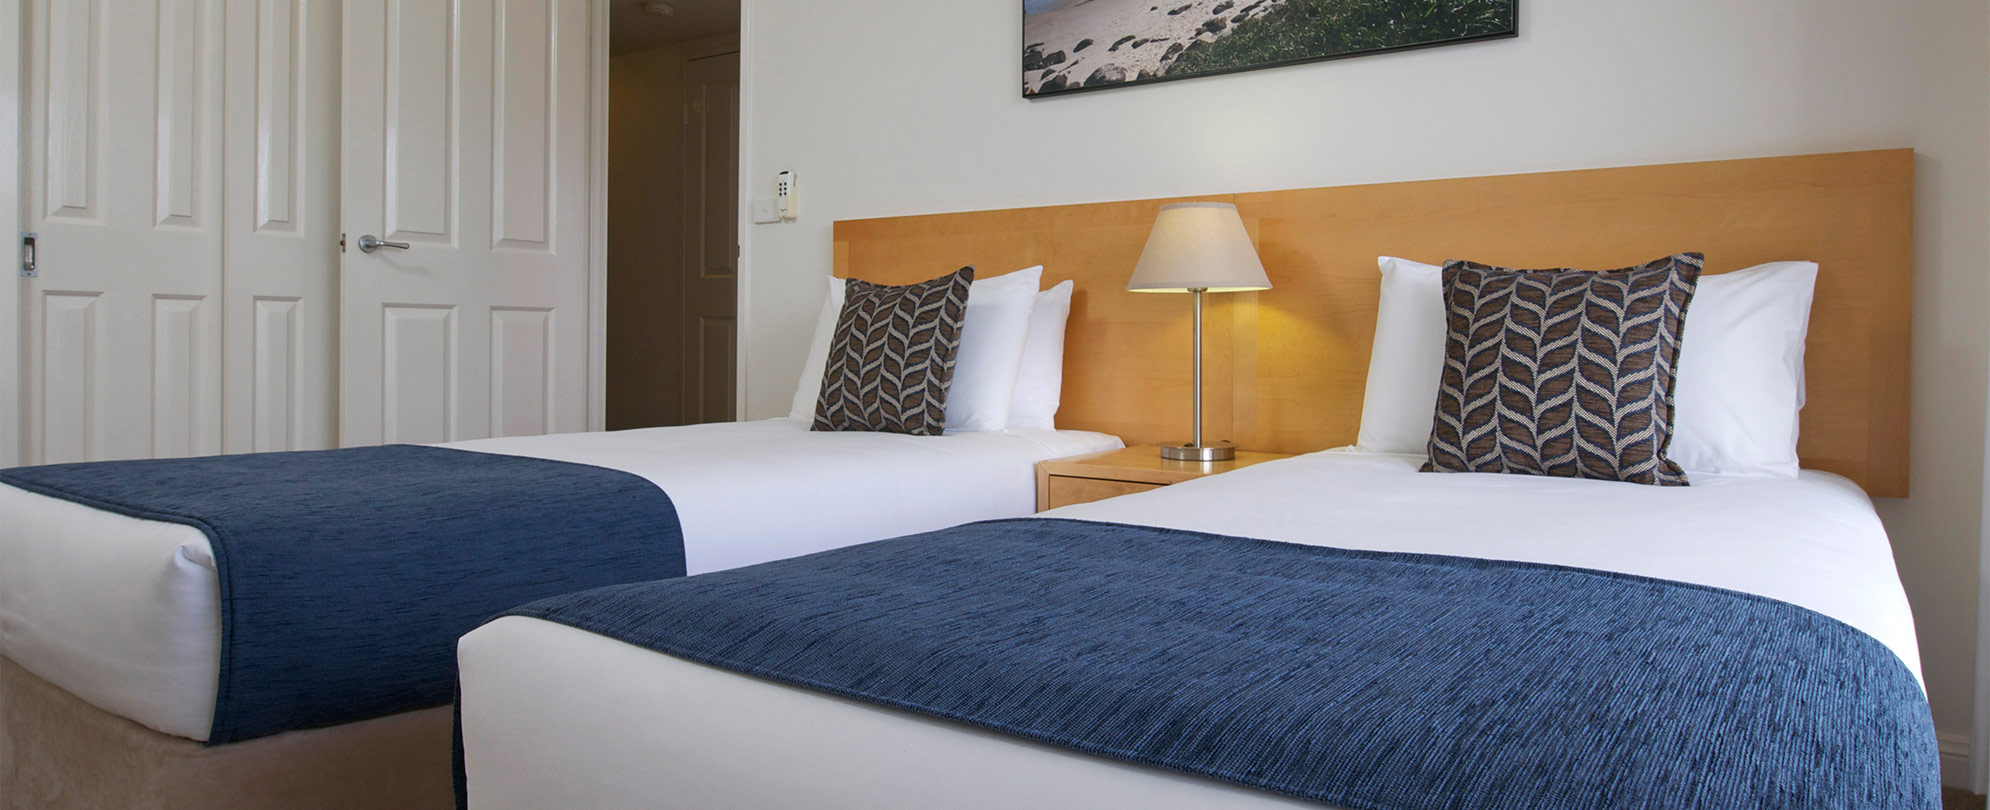 Two beds separated by a nightstand and lamp in a suite at Club Wyndham Port Macquarie.